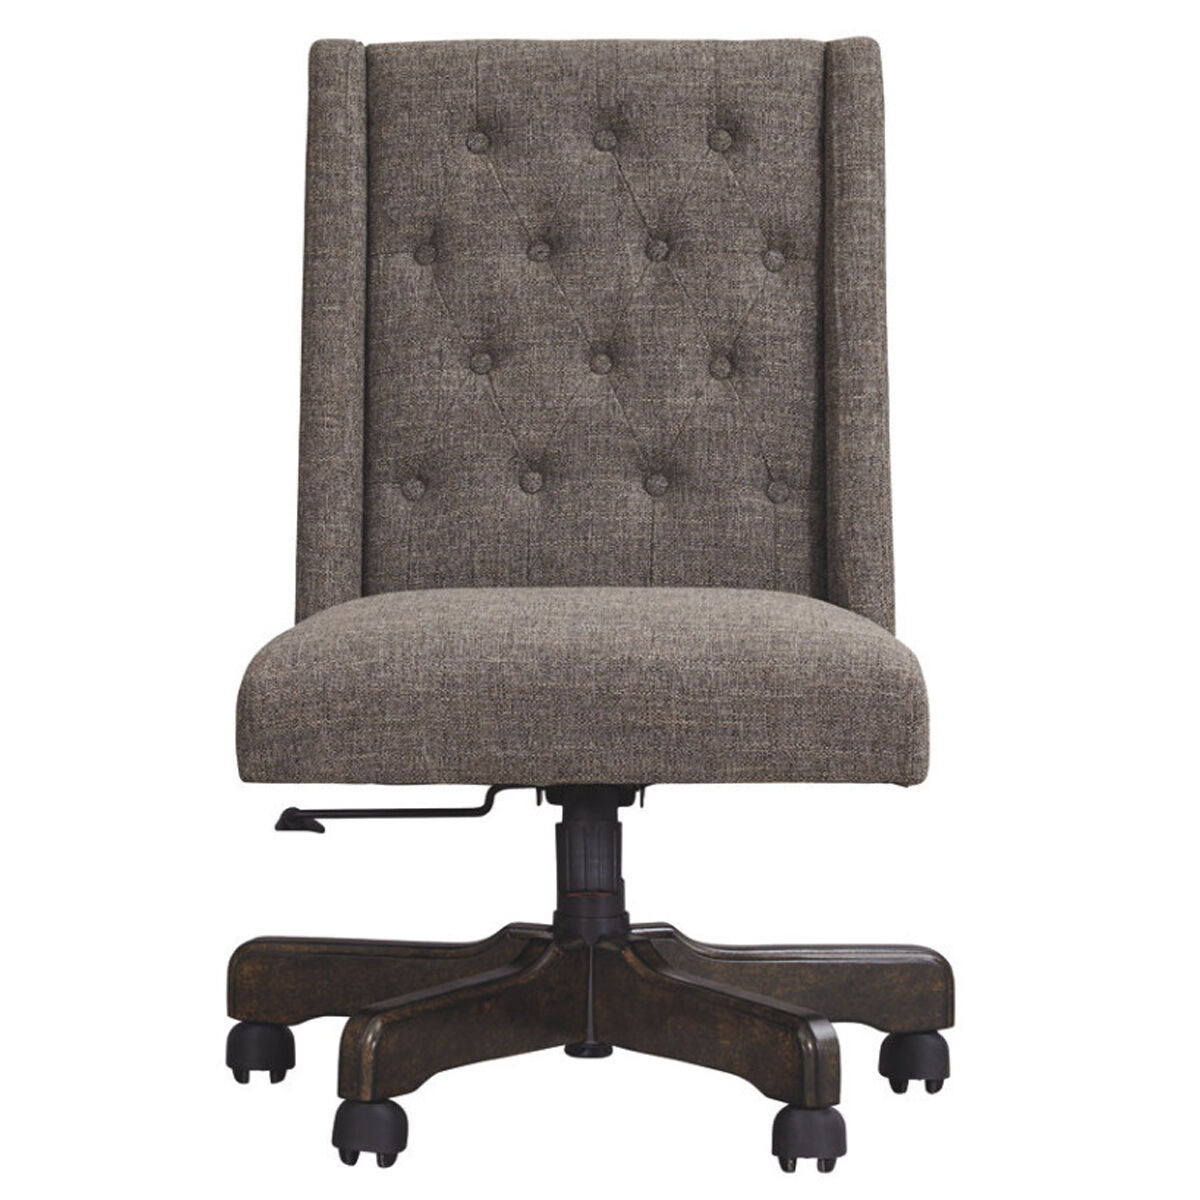 Button Tufted Polyester Upholstered Metal Swivel Chair with Adjustable Seat, Gray and Black